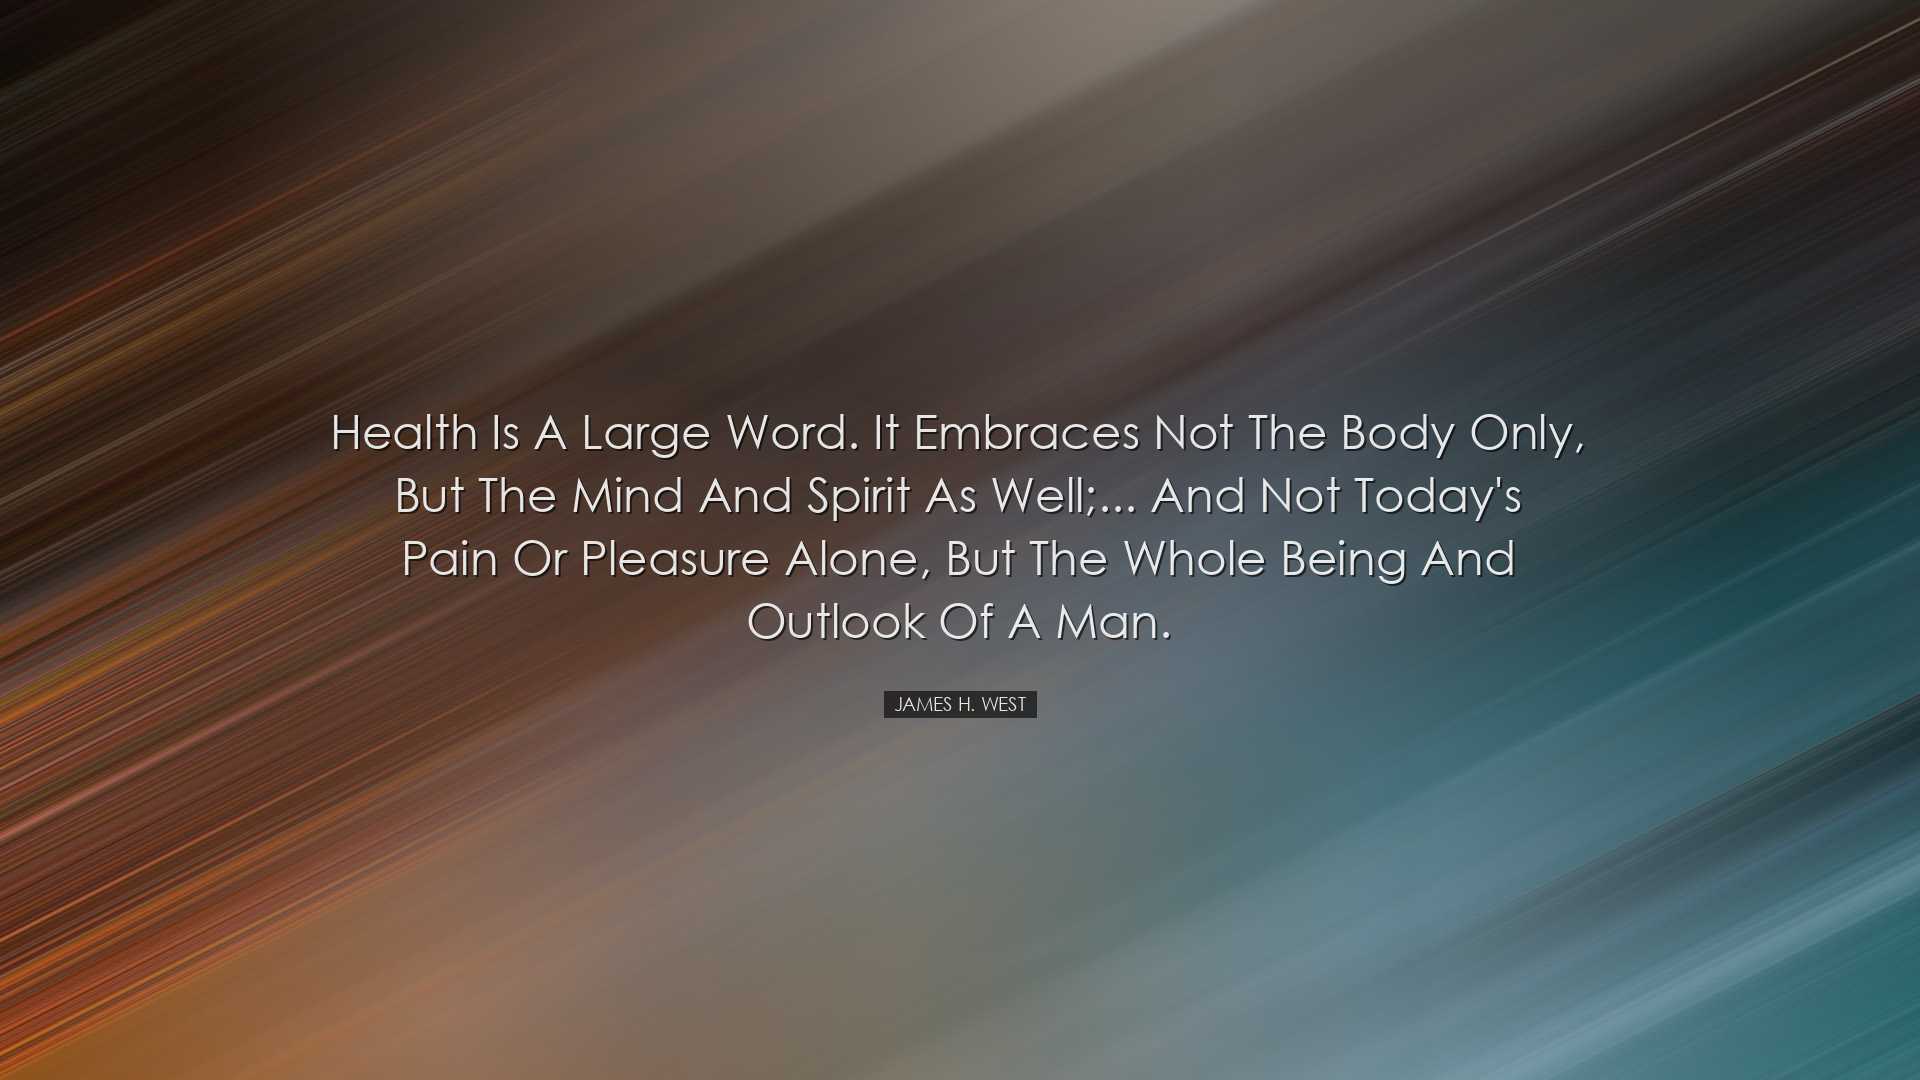 Health is a large word. It embraces not the body only, but the min